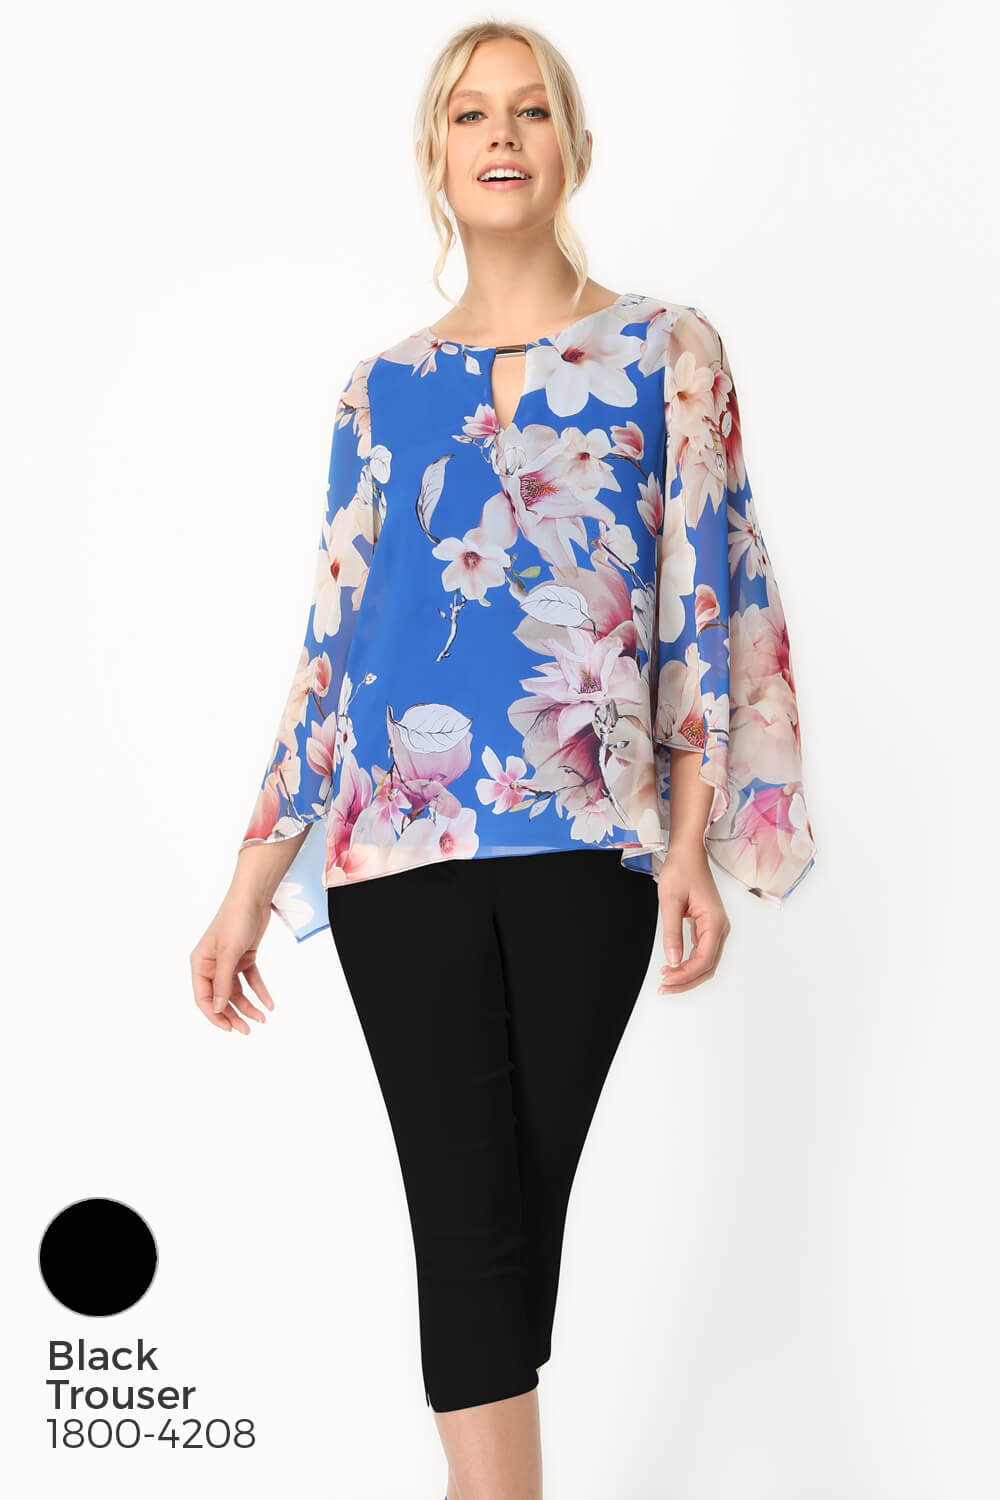 Royal Blue Floral Chiffon Overlay Top, Image 8 of 8